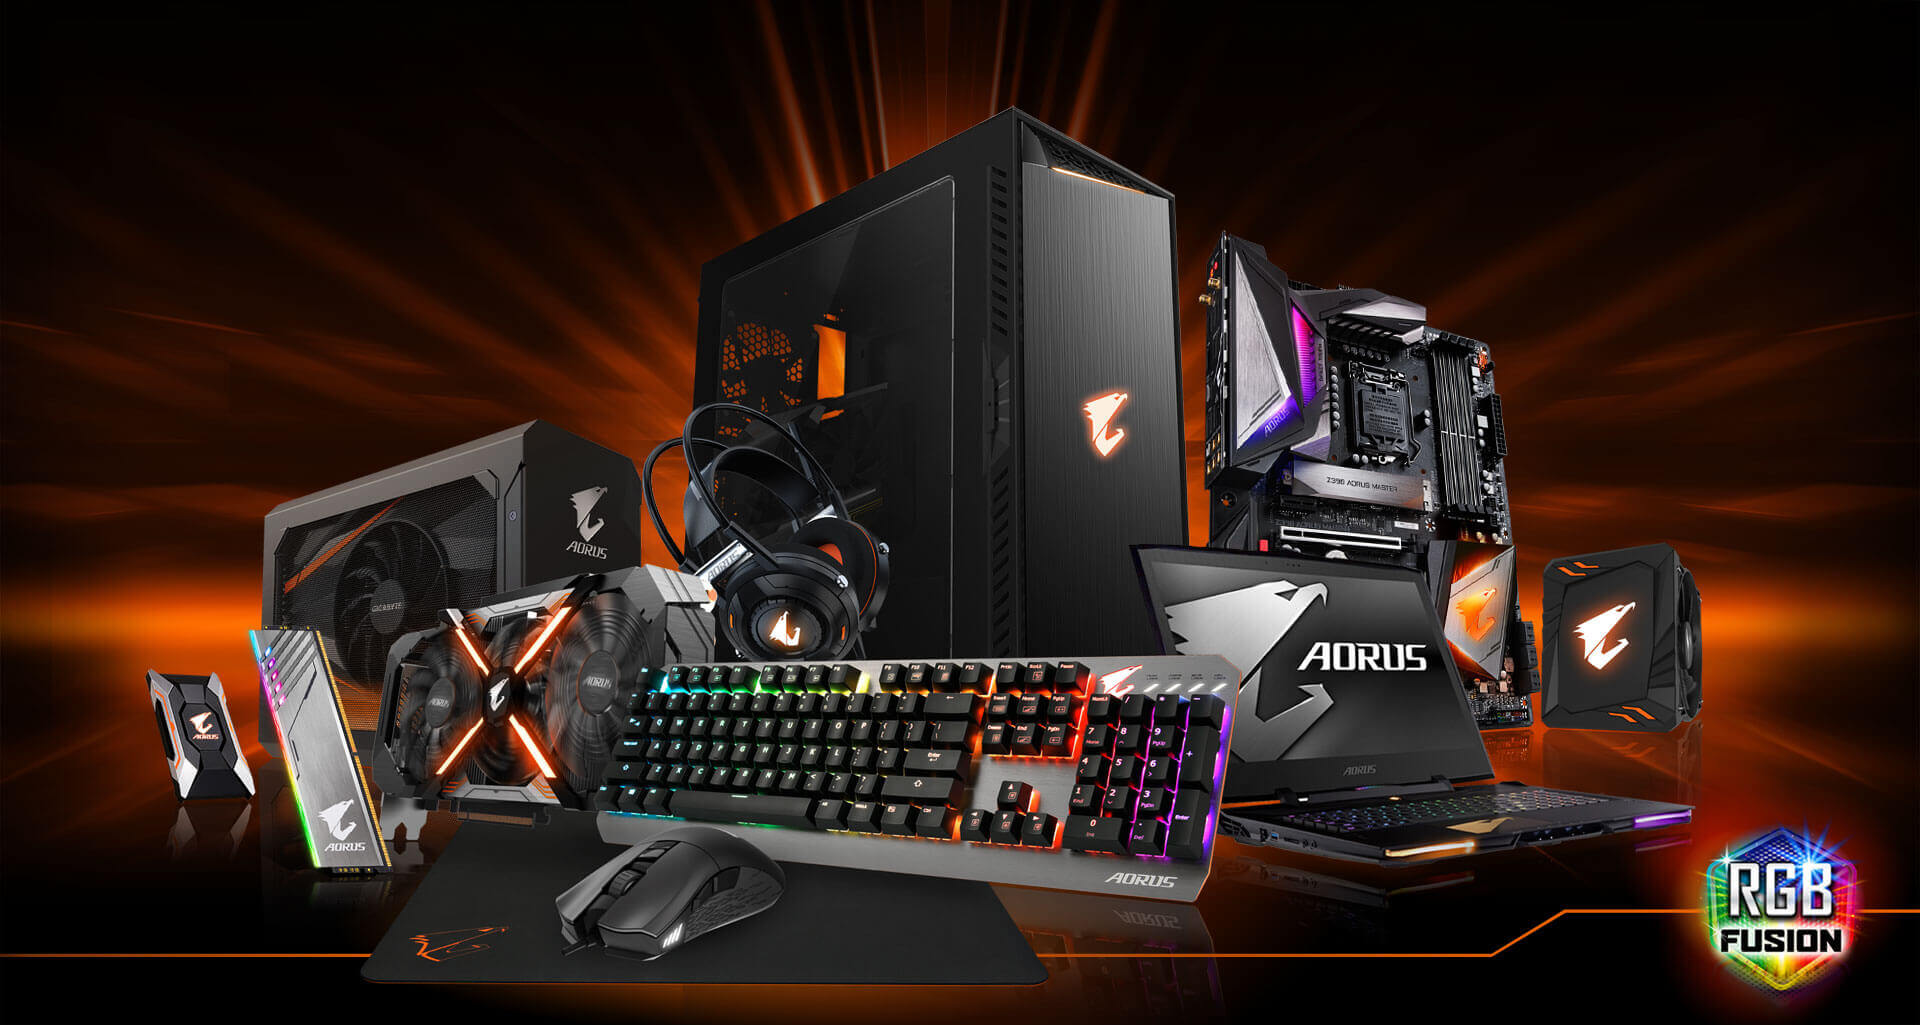 GIGABYTE Products Including: External Graphics Card, SSD, Memory, Mouse, Mouse Pad, Keyboard, Laptop, Desktop PC, Motherboard and the RGB Fusion Logo